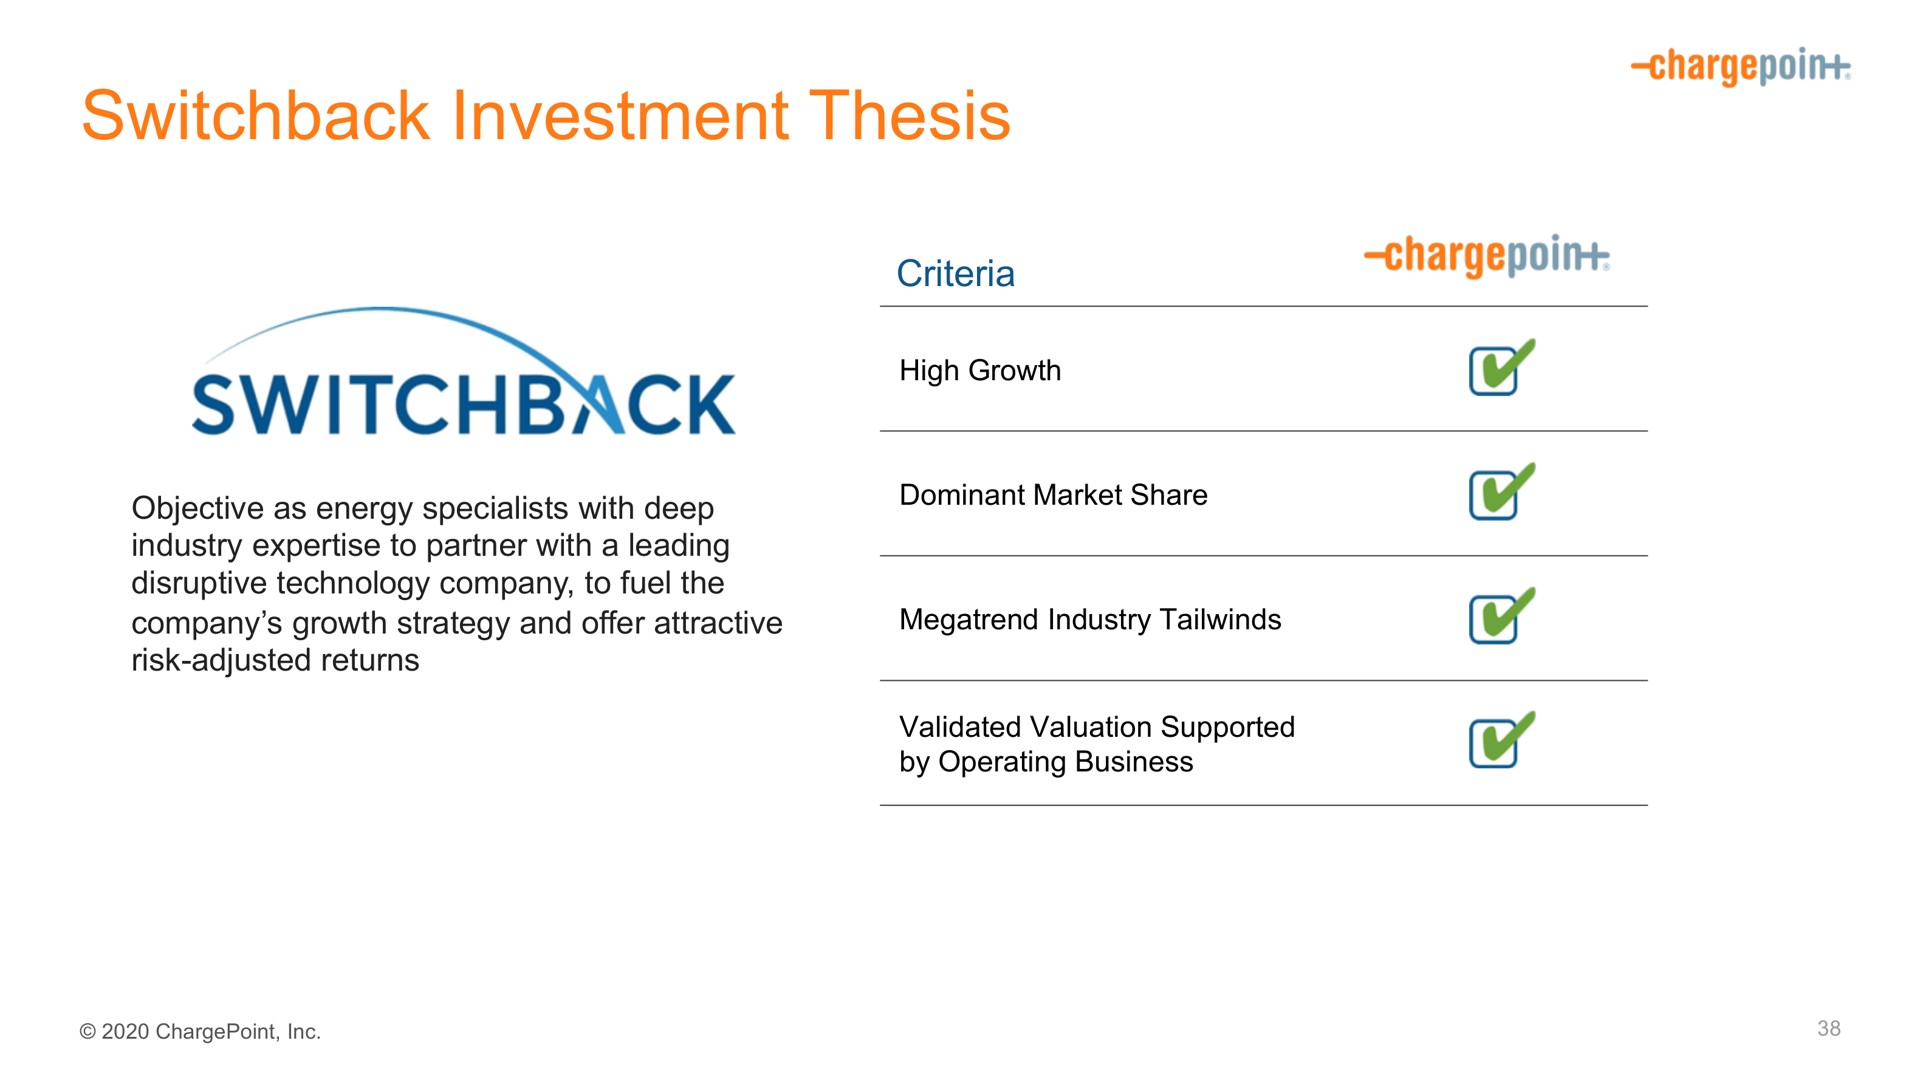 switchback investment thesis | ChargePoint